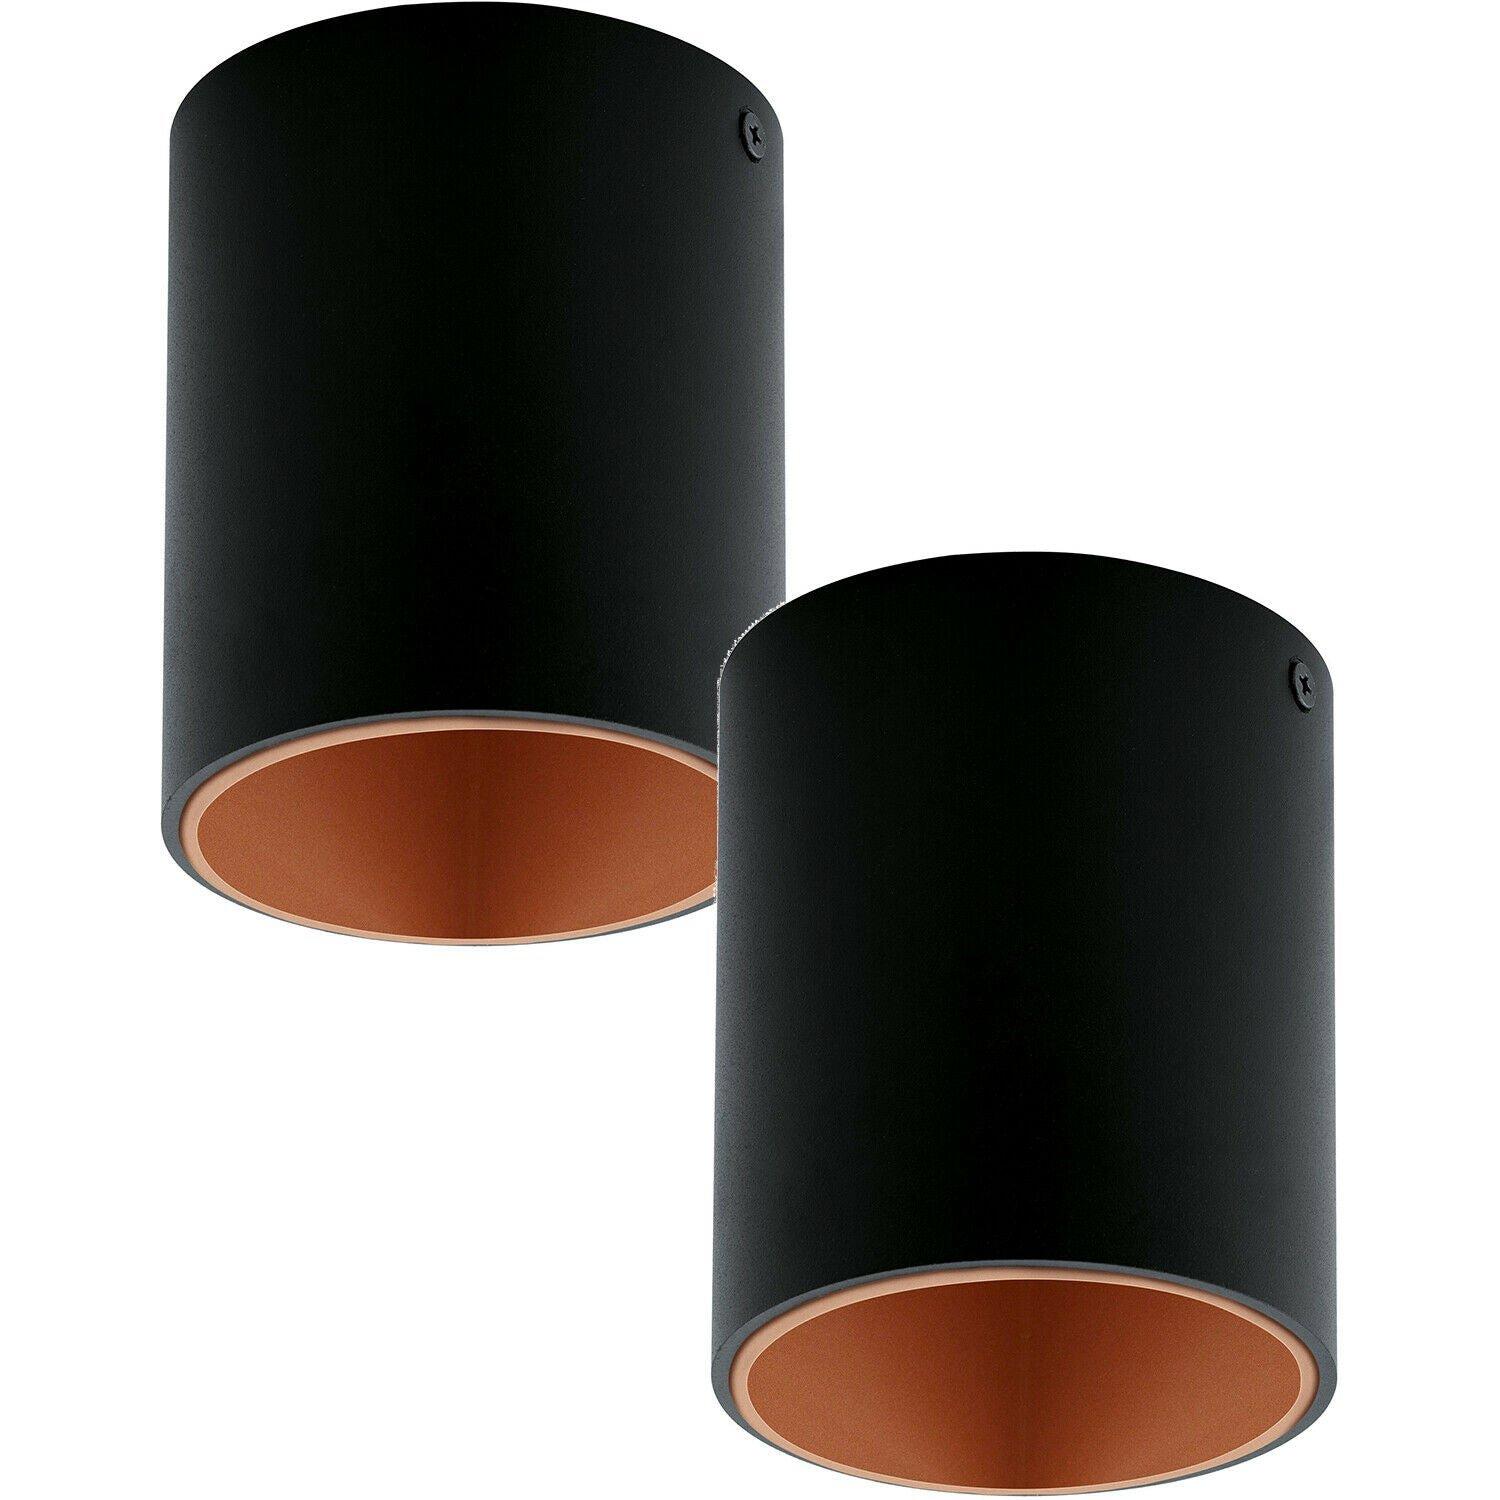 2 PACK Wall / Ceiling Light Black & Copper Round Downlight 3.3W Built in LED